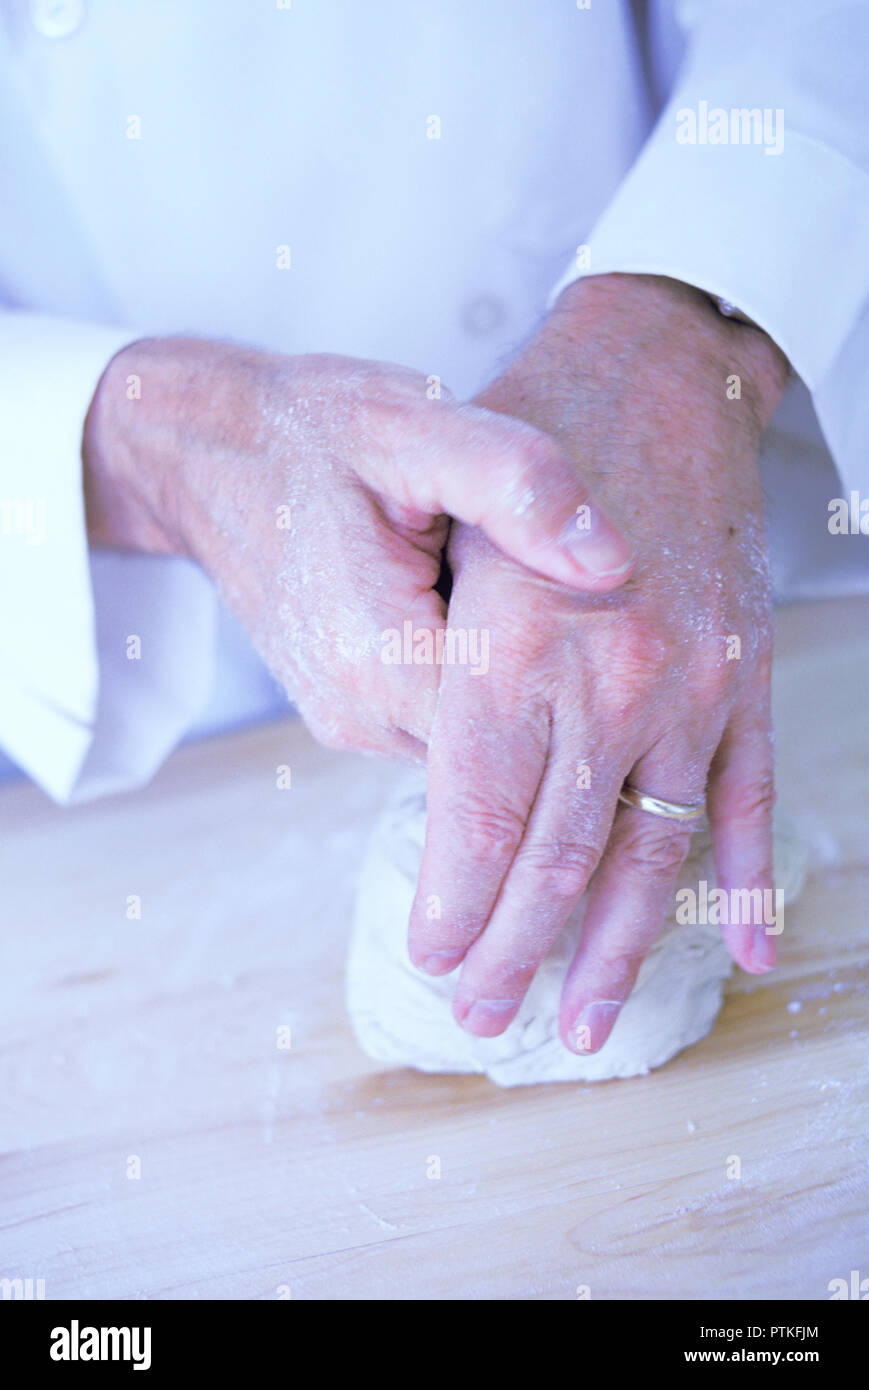 Repetitive motion hand injury to a bakery chef, USA Stock Photo